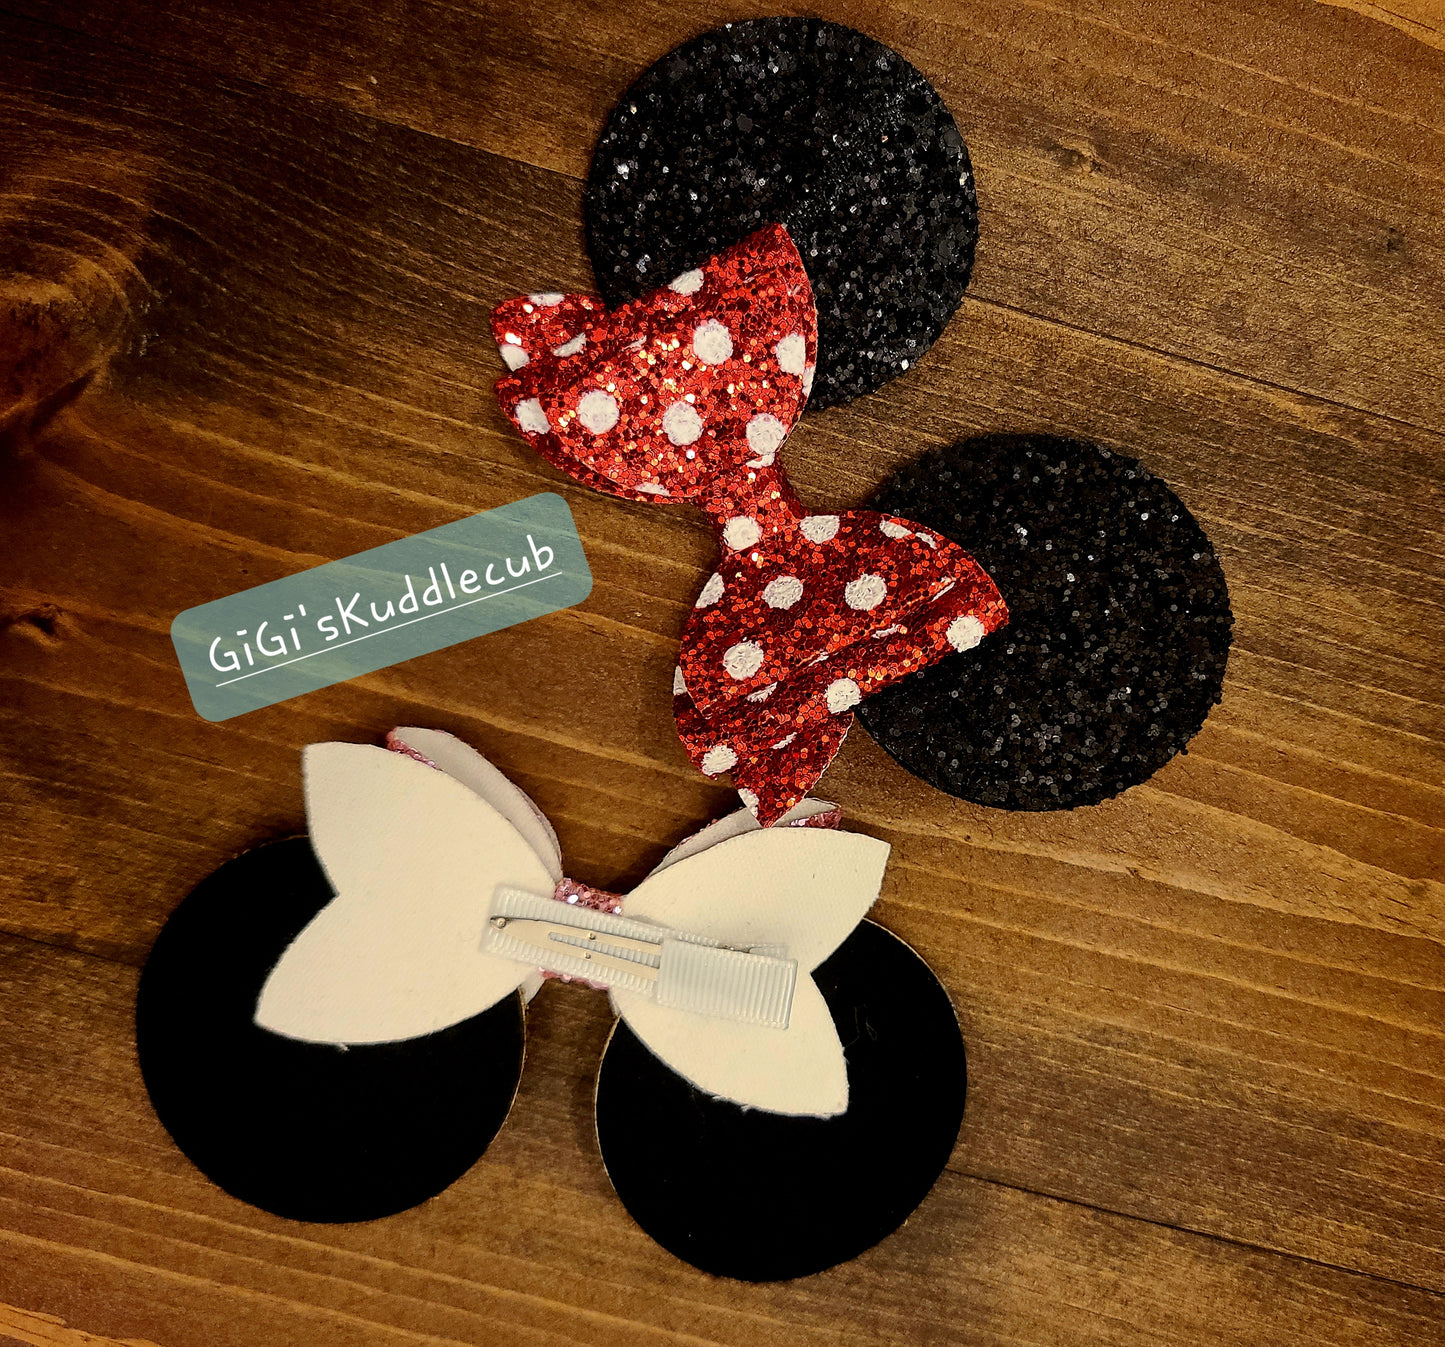 Fashion Mouse Ears Glitter Hair Bow Barrette Hair Accessories For Toddlers/Girls (2pcs)